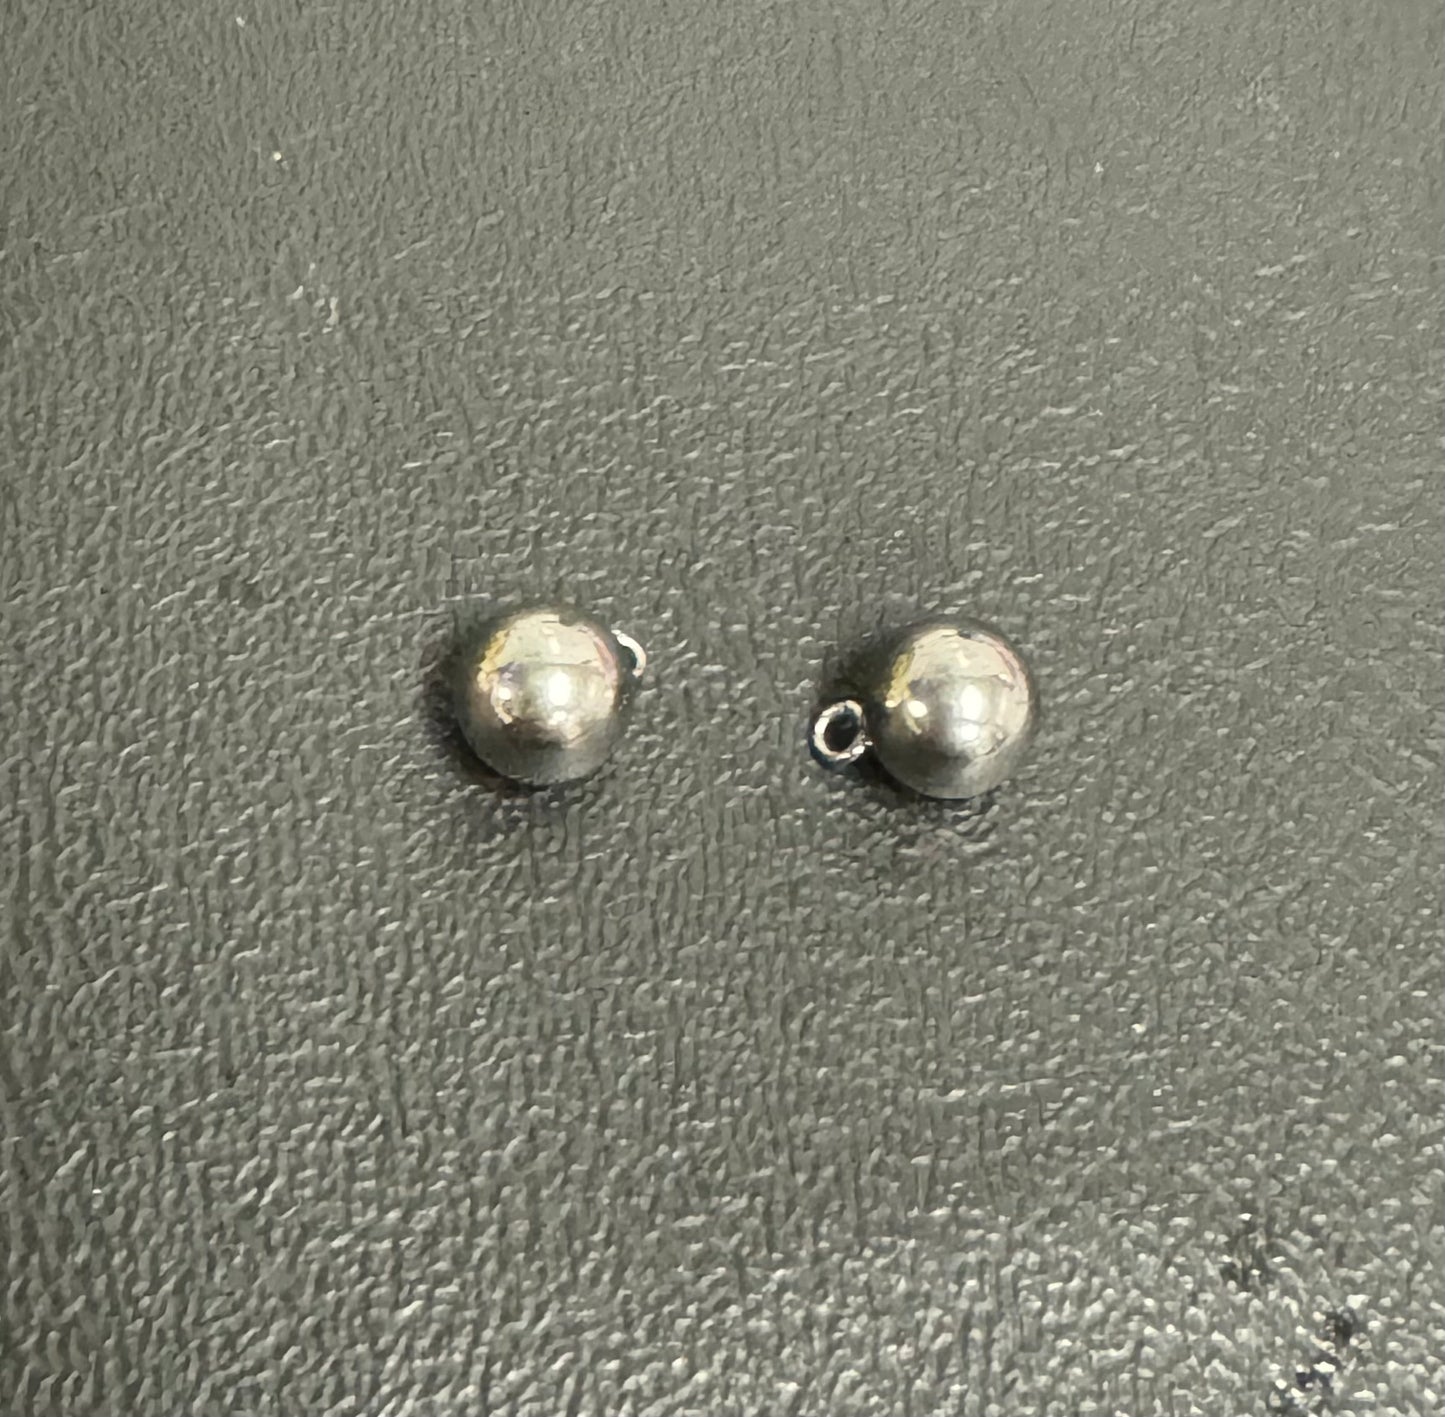 Stainless Steel 8mm Round Bead Charm